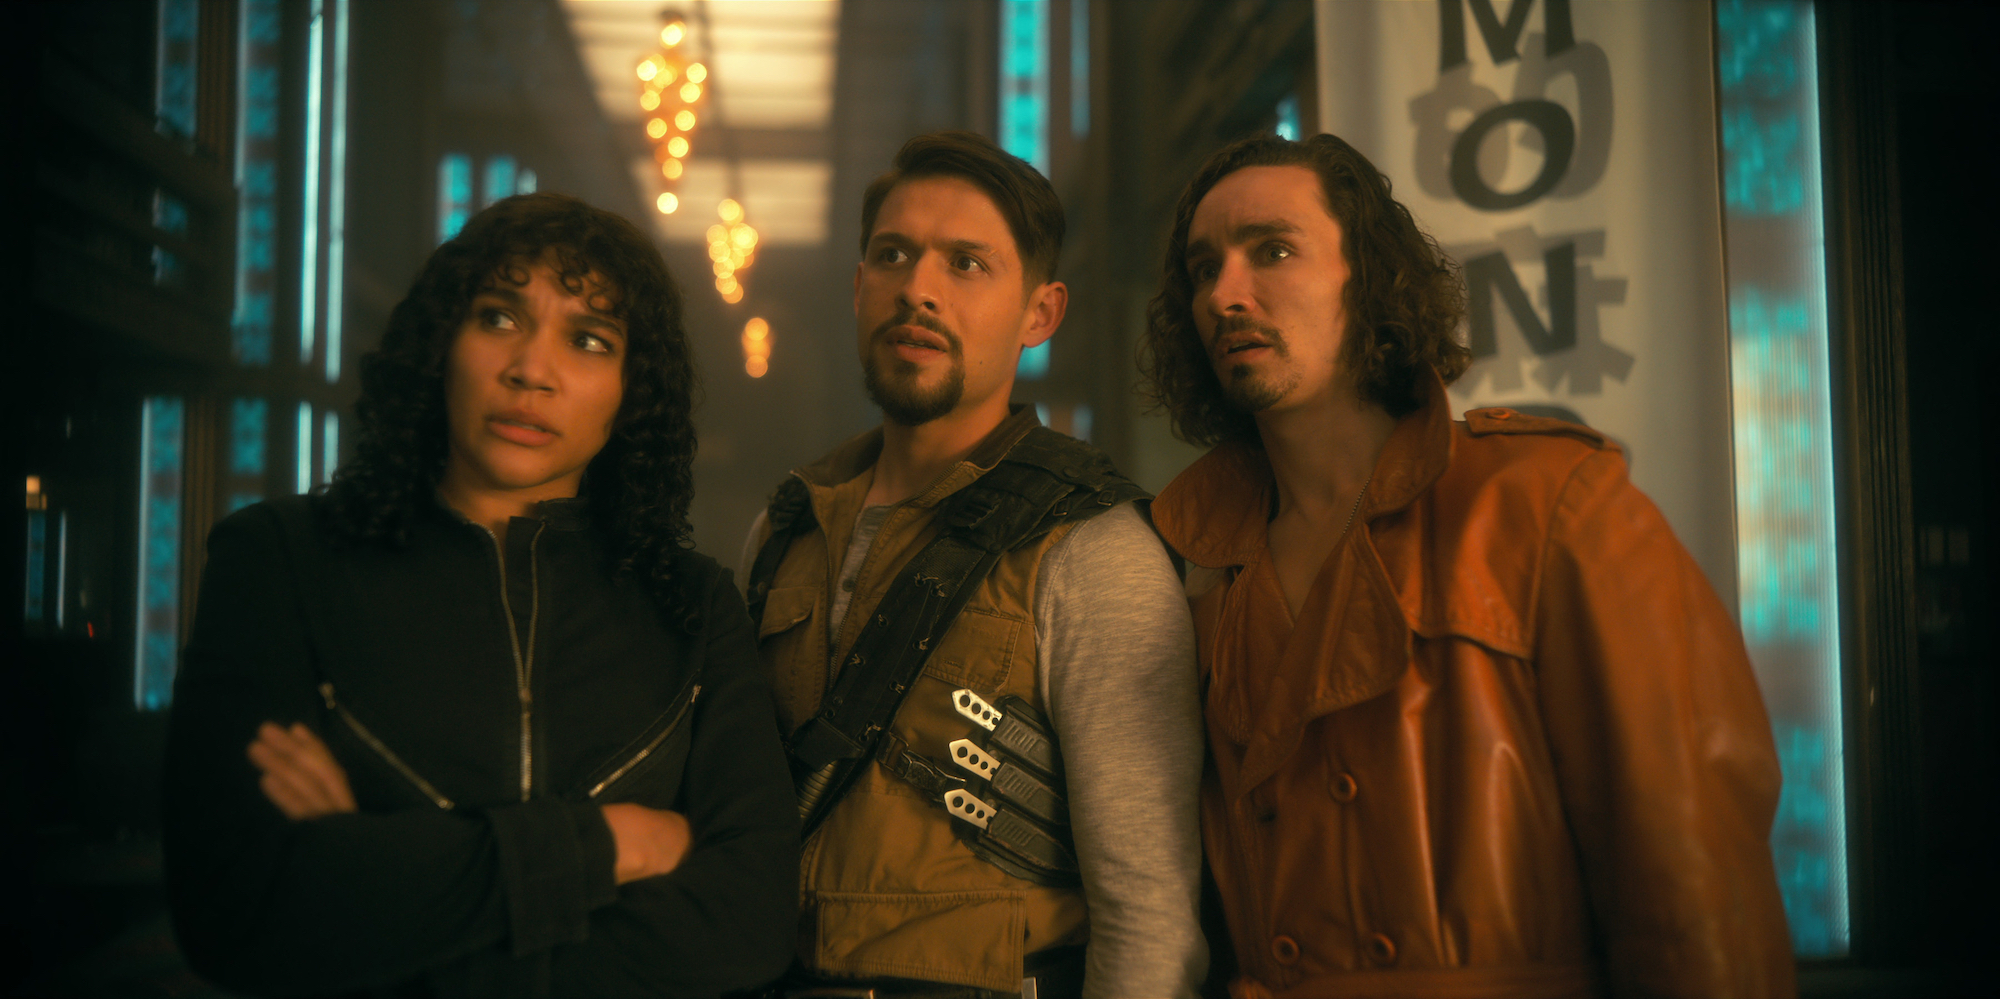 'The Umbrella Academy' Season 3 new images feature Emmy Raver-Lampman, David Castañeda, and Robert Sheehan seen here in a production still